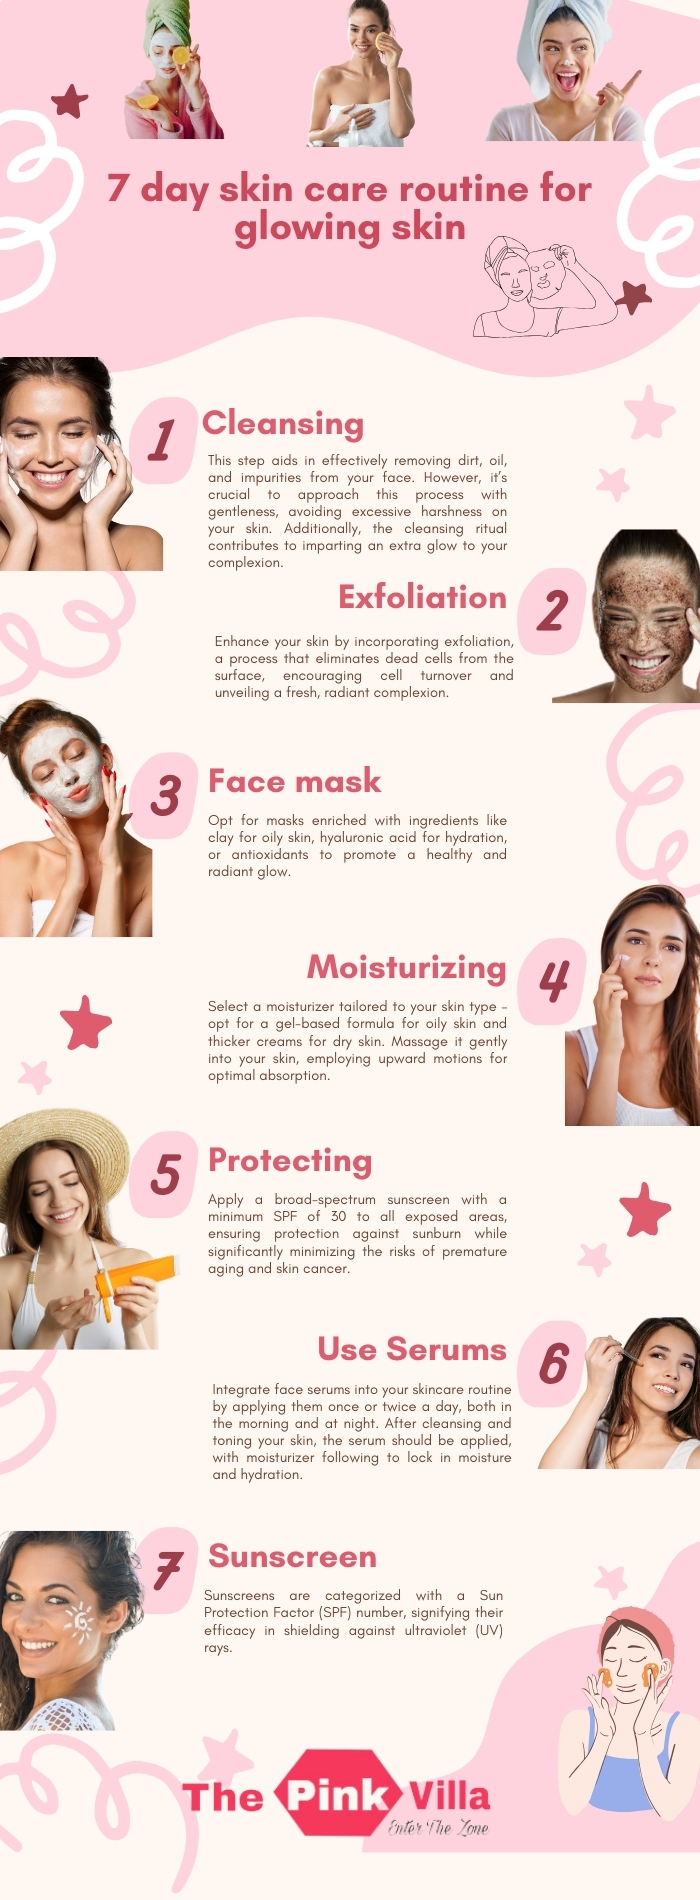 7 day skin care routine for Glowing Skin